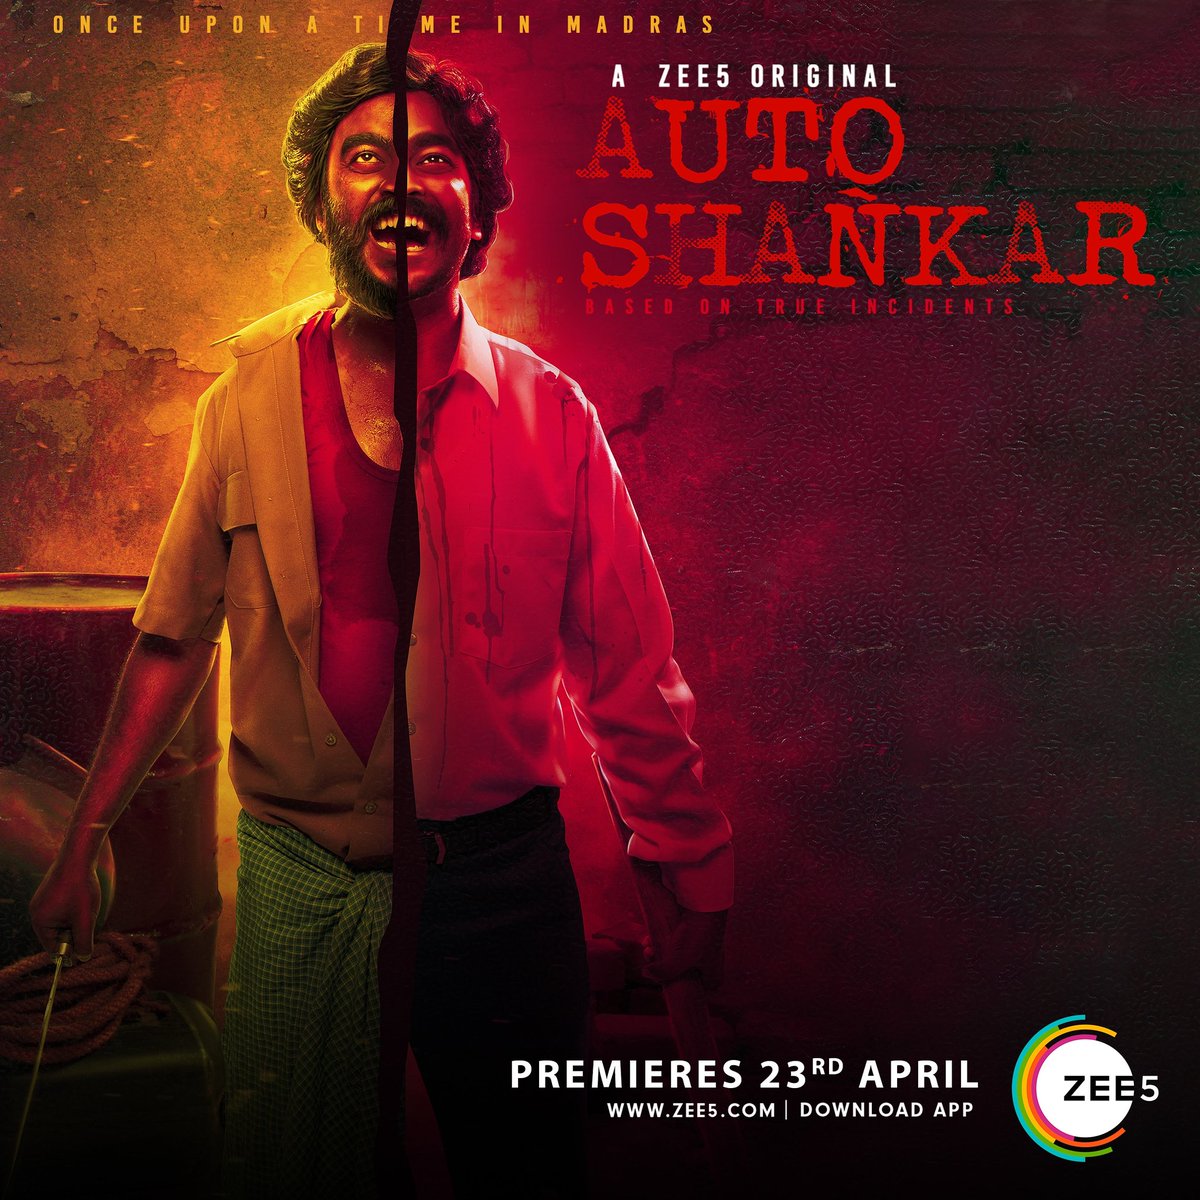 Here it is. AUTO SHANKAR premieres 23rd April. 
TEASER from today 5PM

#OnceUponATimeinMadras
#zee5tamil 
Web series based on true incidents.